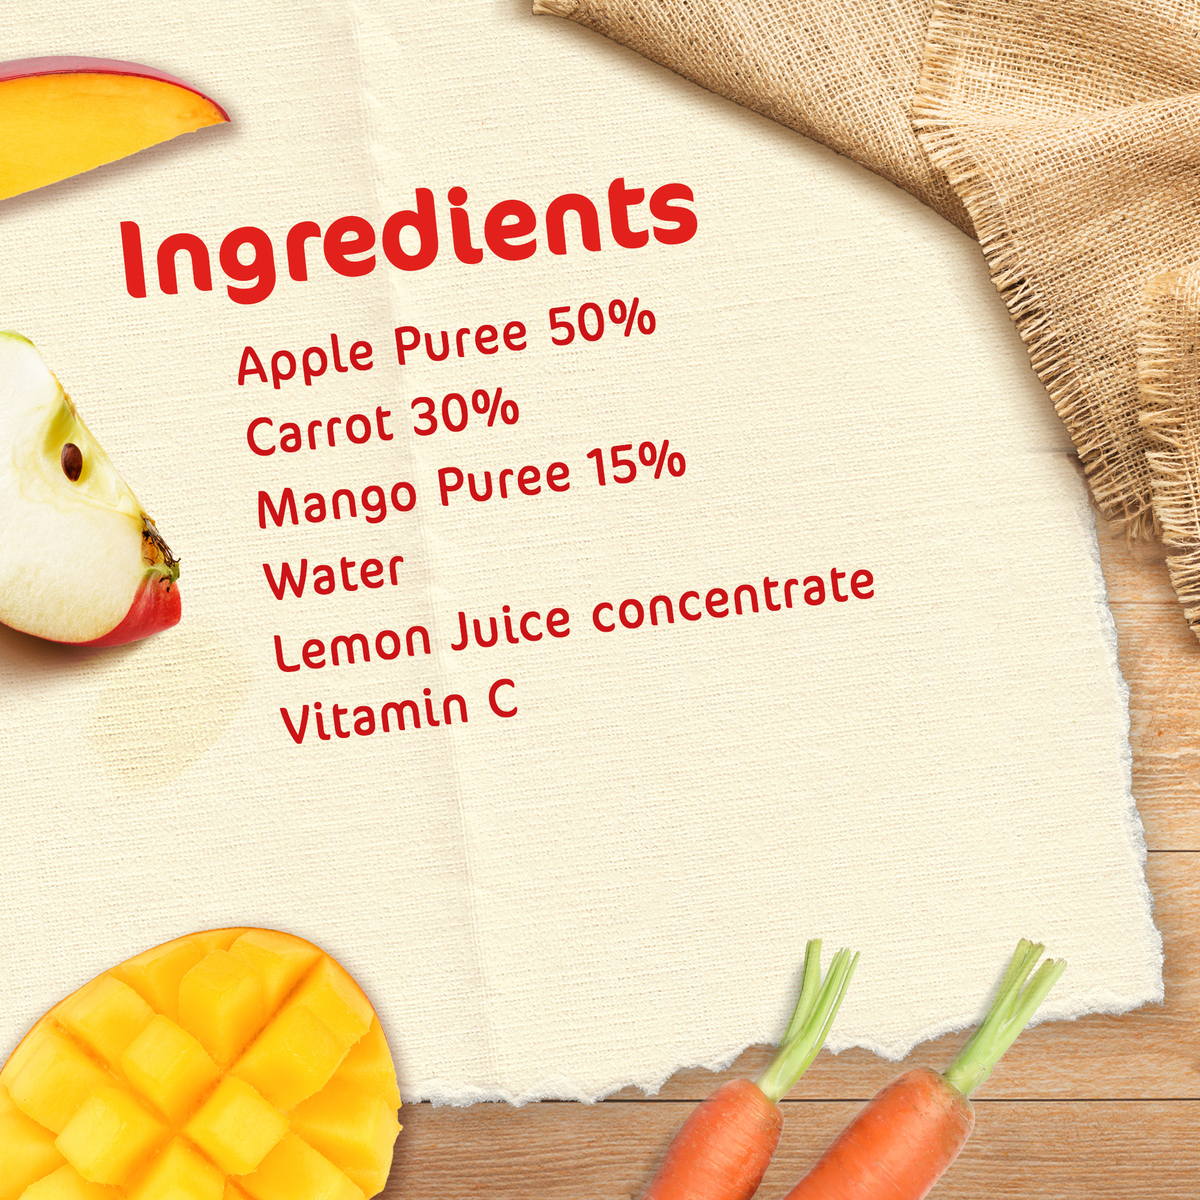 Nestle Cerelac Fruits & Vegetables Puree Pouch Apple, Carrot & Mango From 6 Months 4 x 90 g